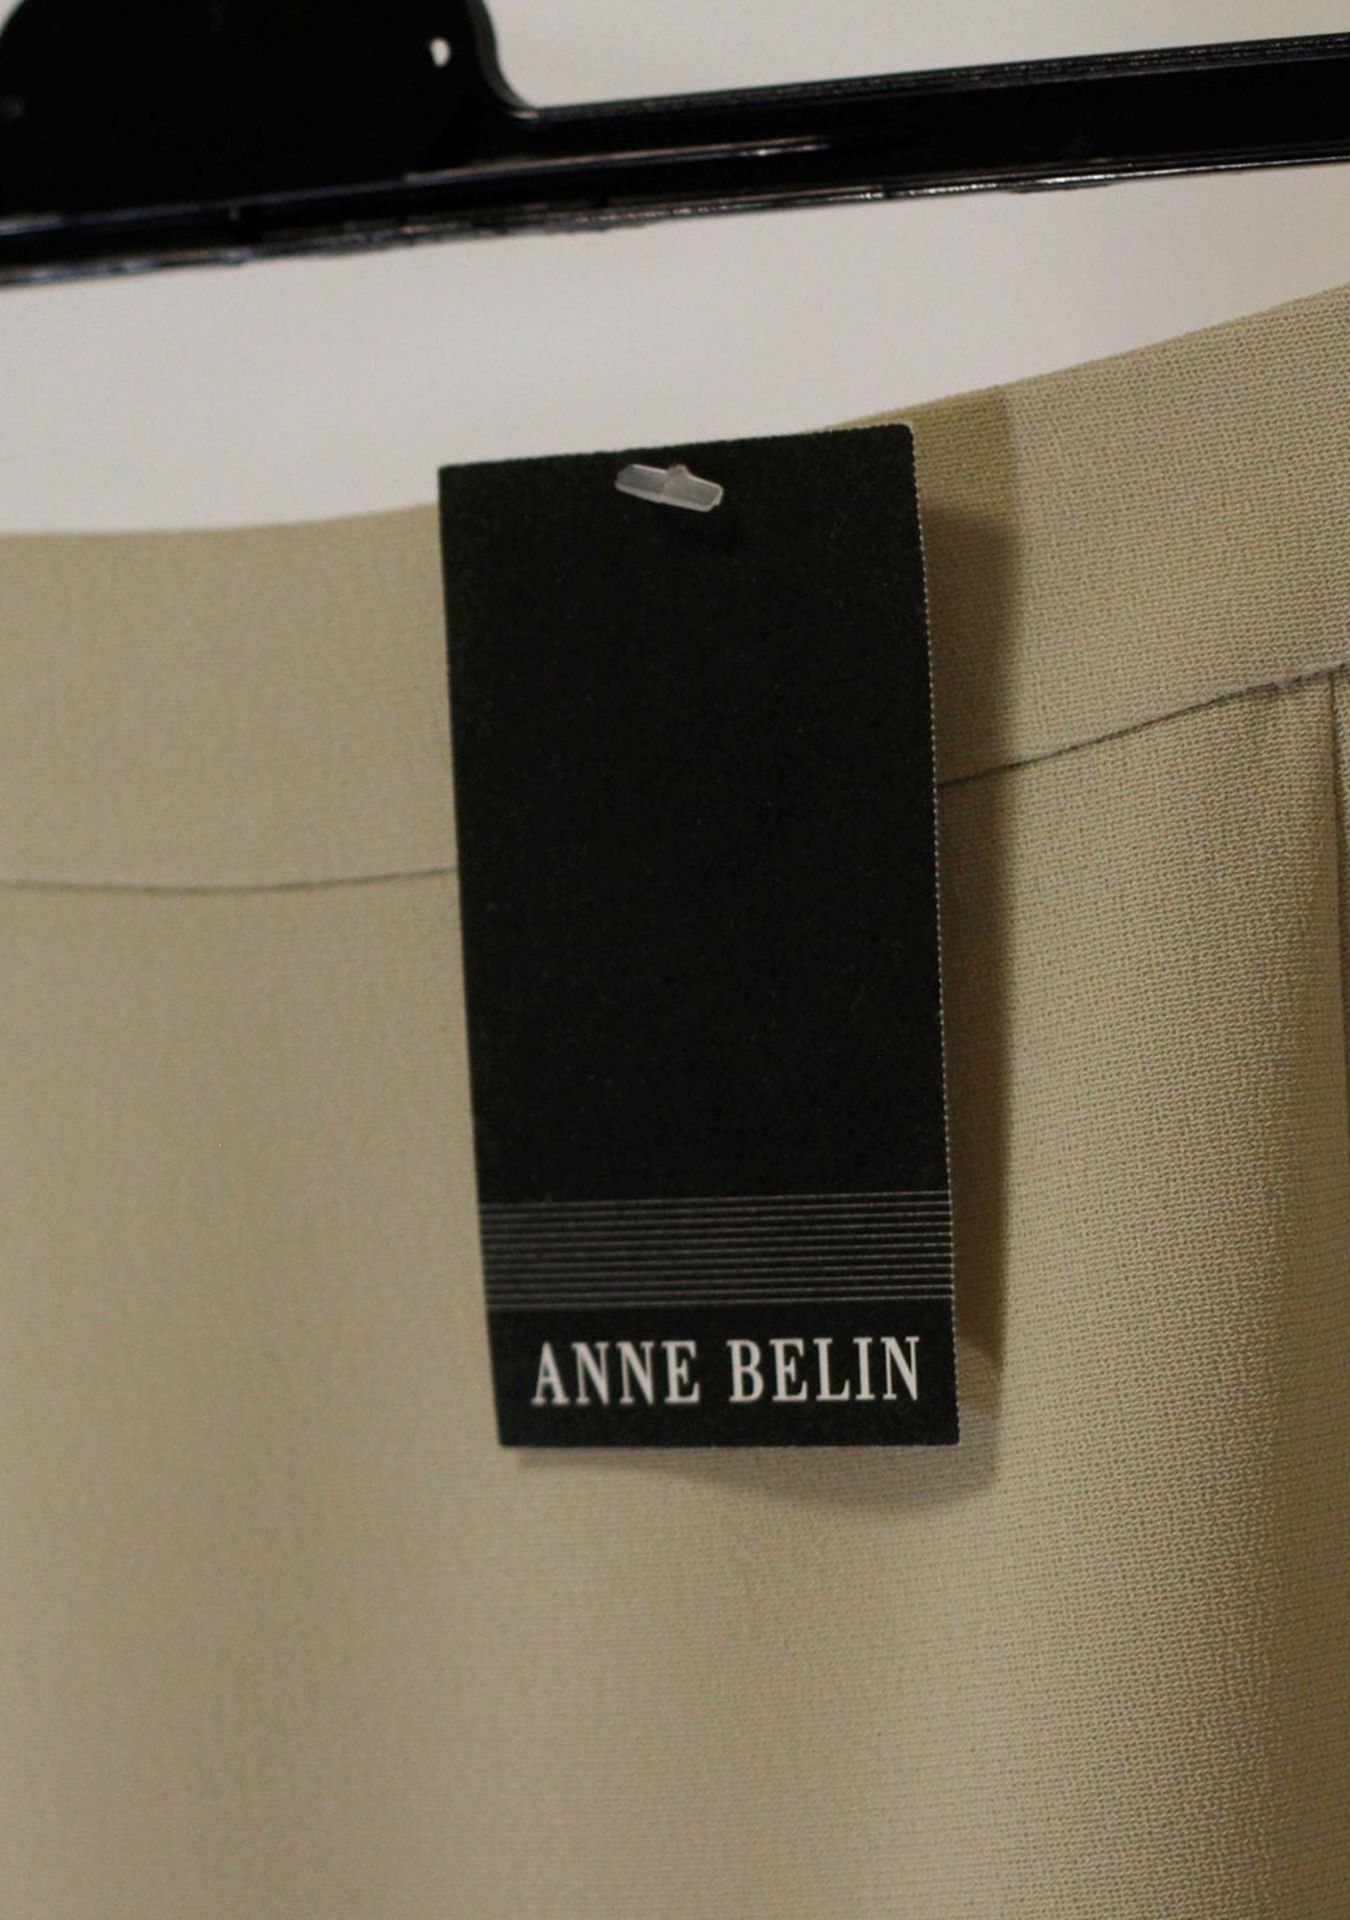 1 x Anne Belin Pistachio Skirt - Size: 16 - Material: 100% Polyester - From a High End Clothing - Image 5 of 11